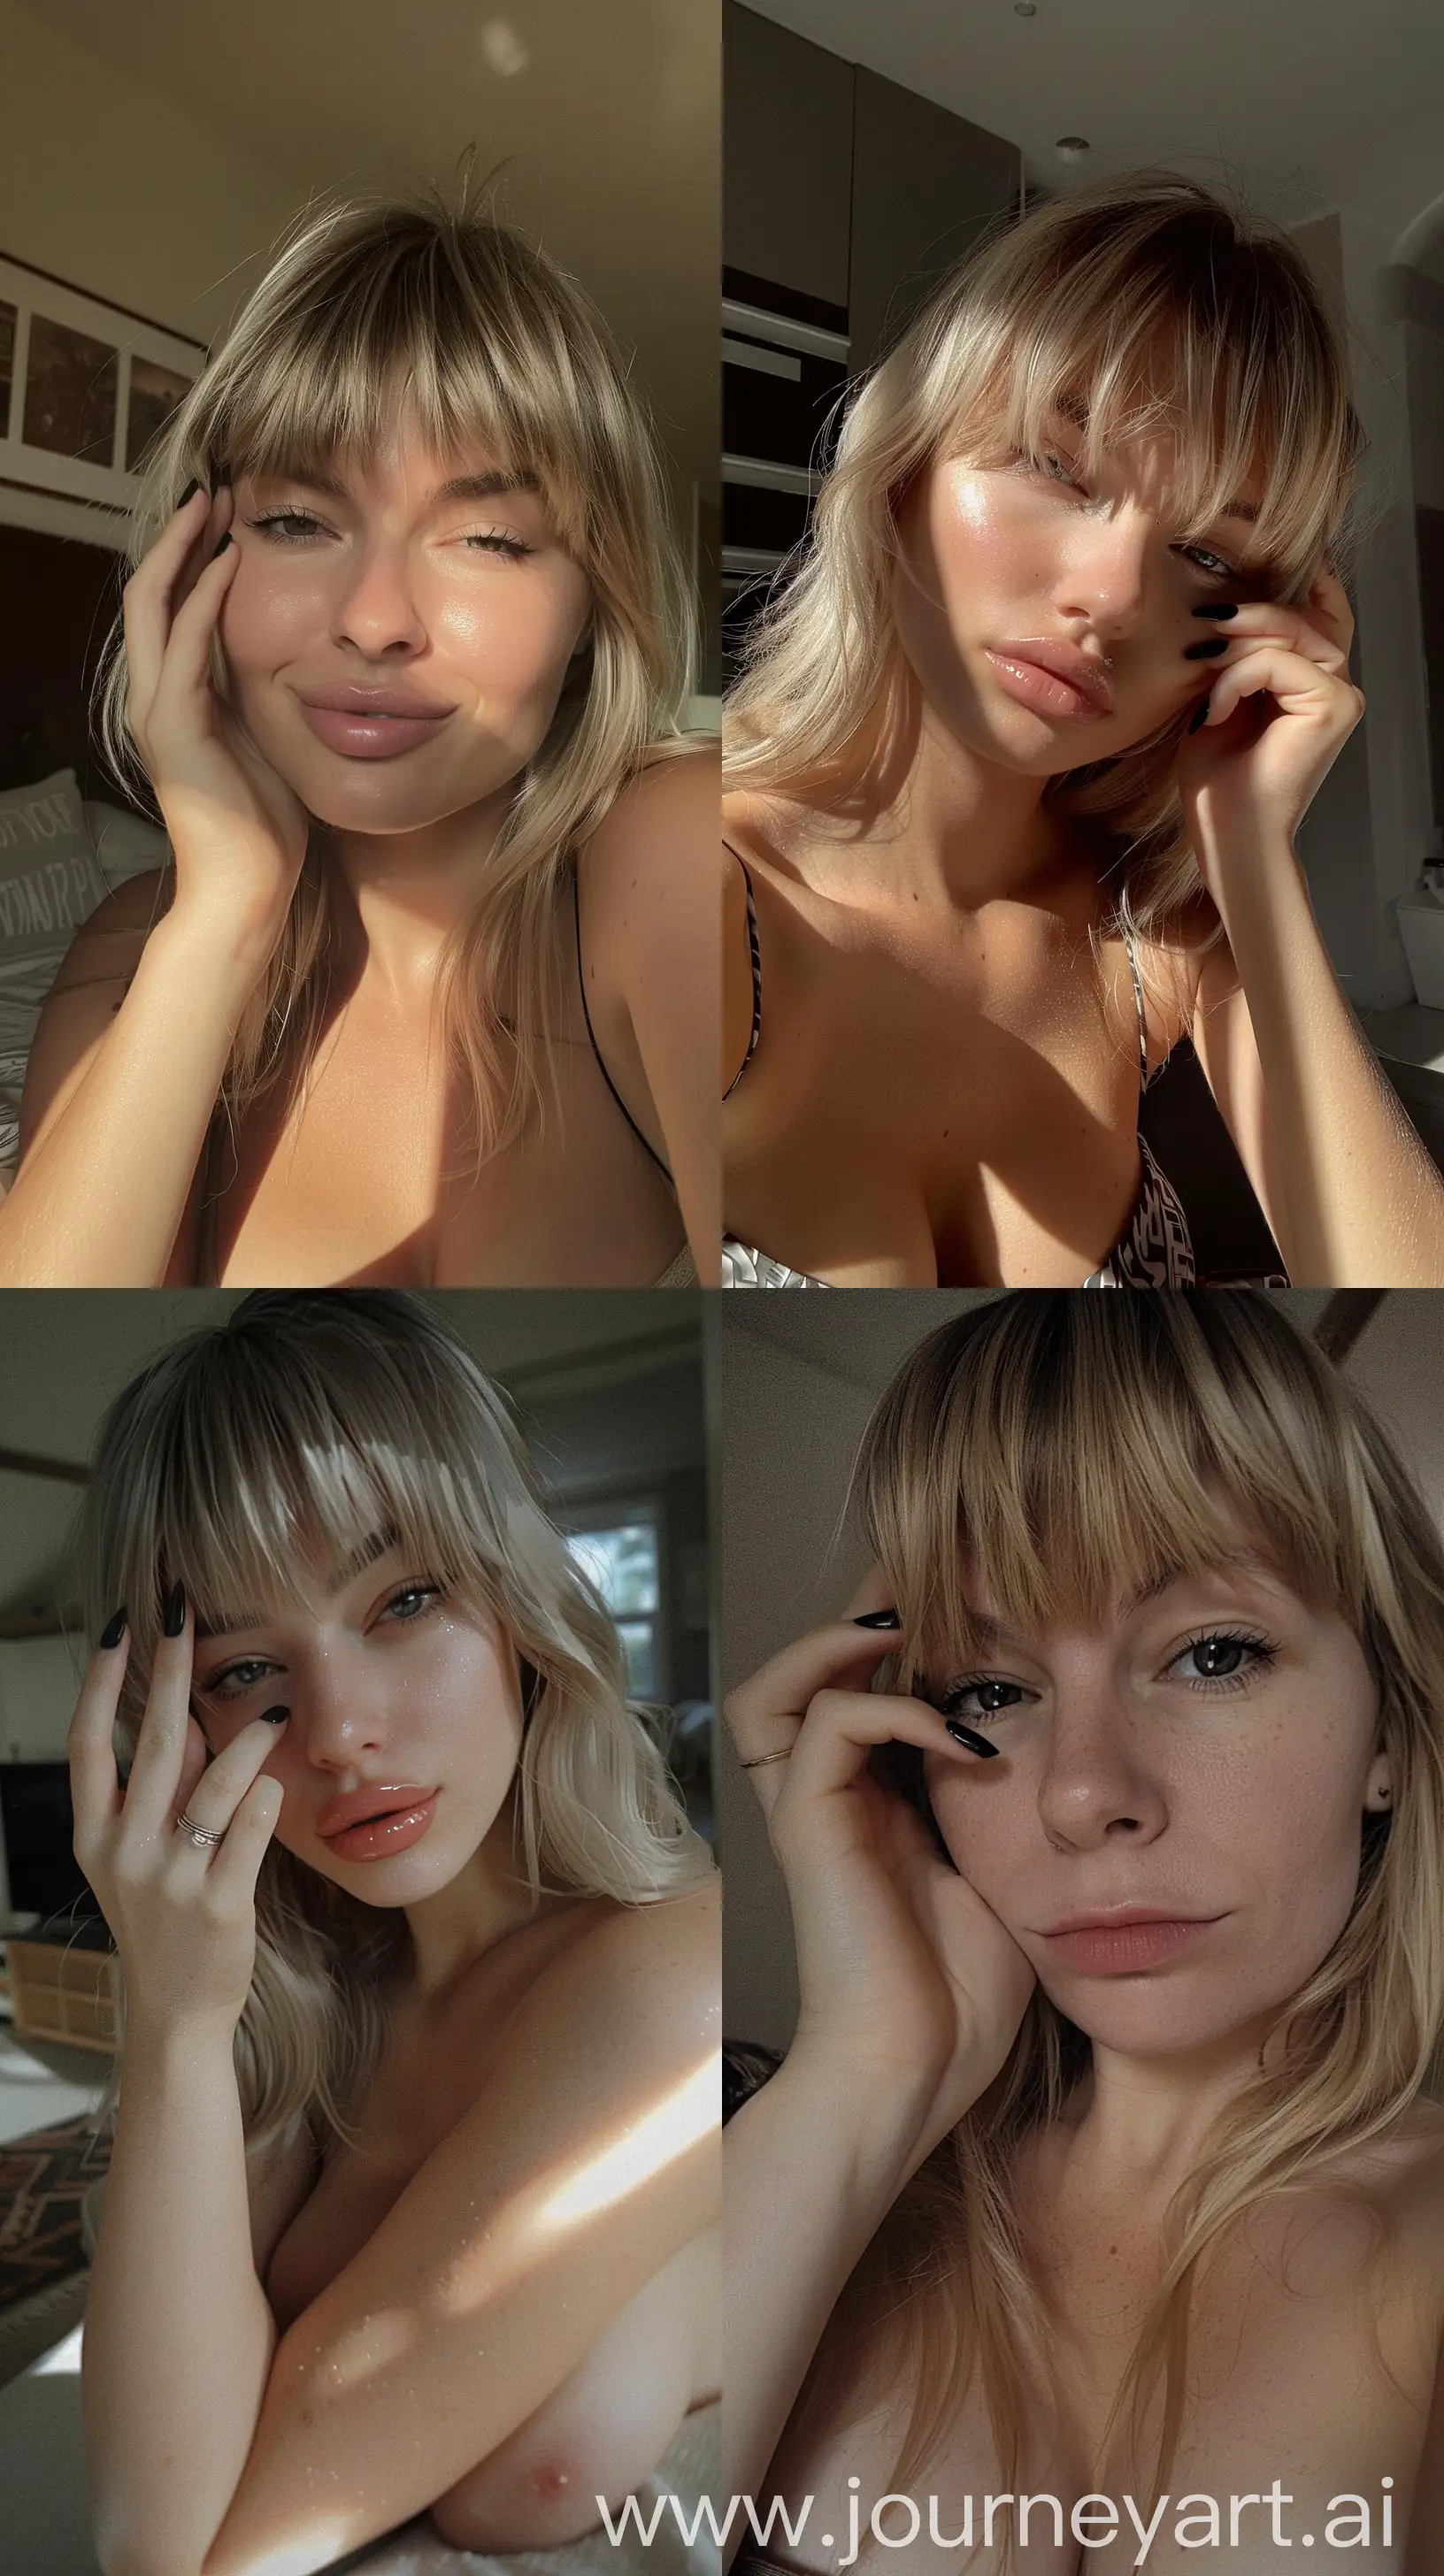 Aesthetic Instagram selfie of a woman in apartment, British, super model, nice chest, no makeup, one hand resting on cheek, black gel nail polish, blonde, bangs, close up, wide set, profile throw face away in room, realistic lighting and shadows --ar 9:16